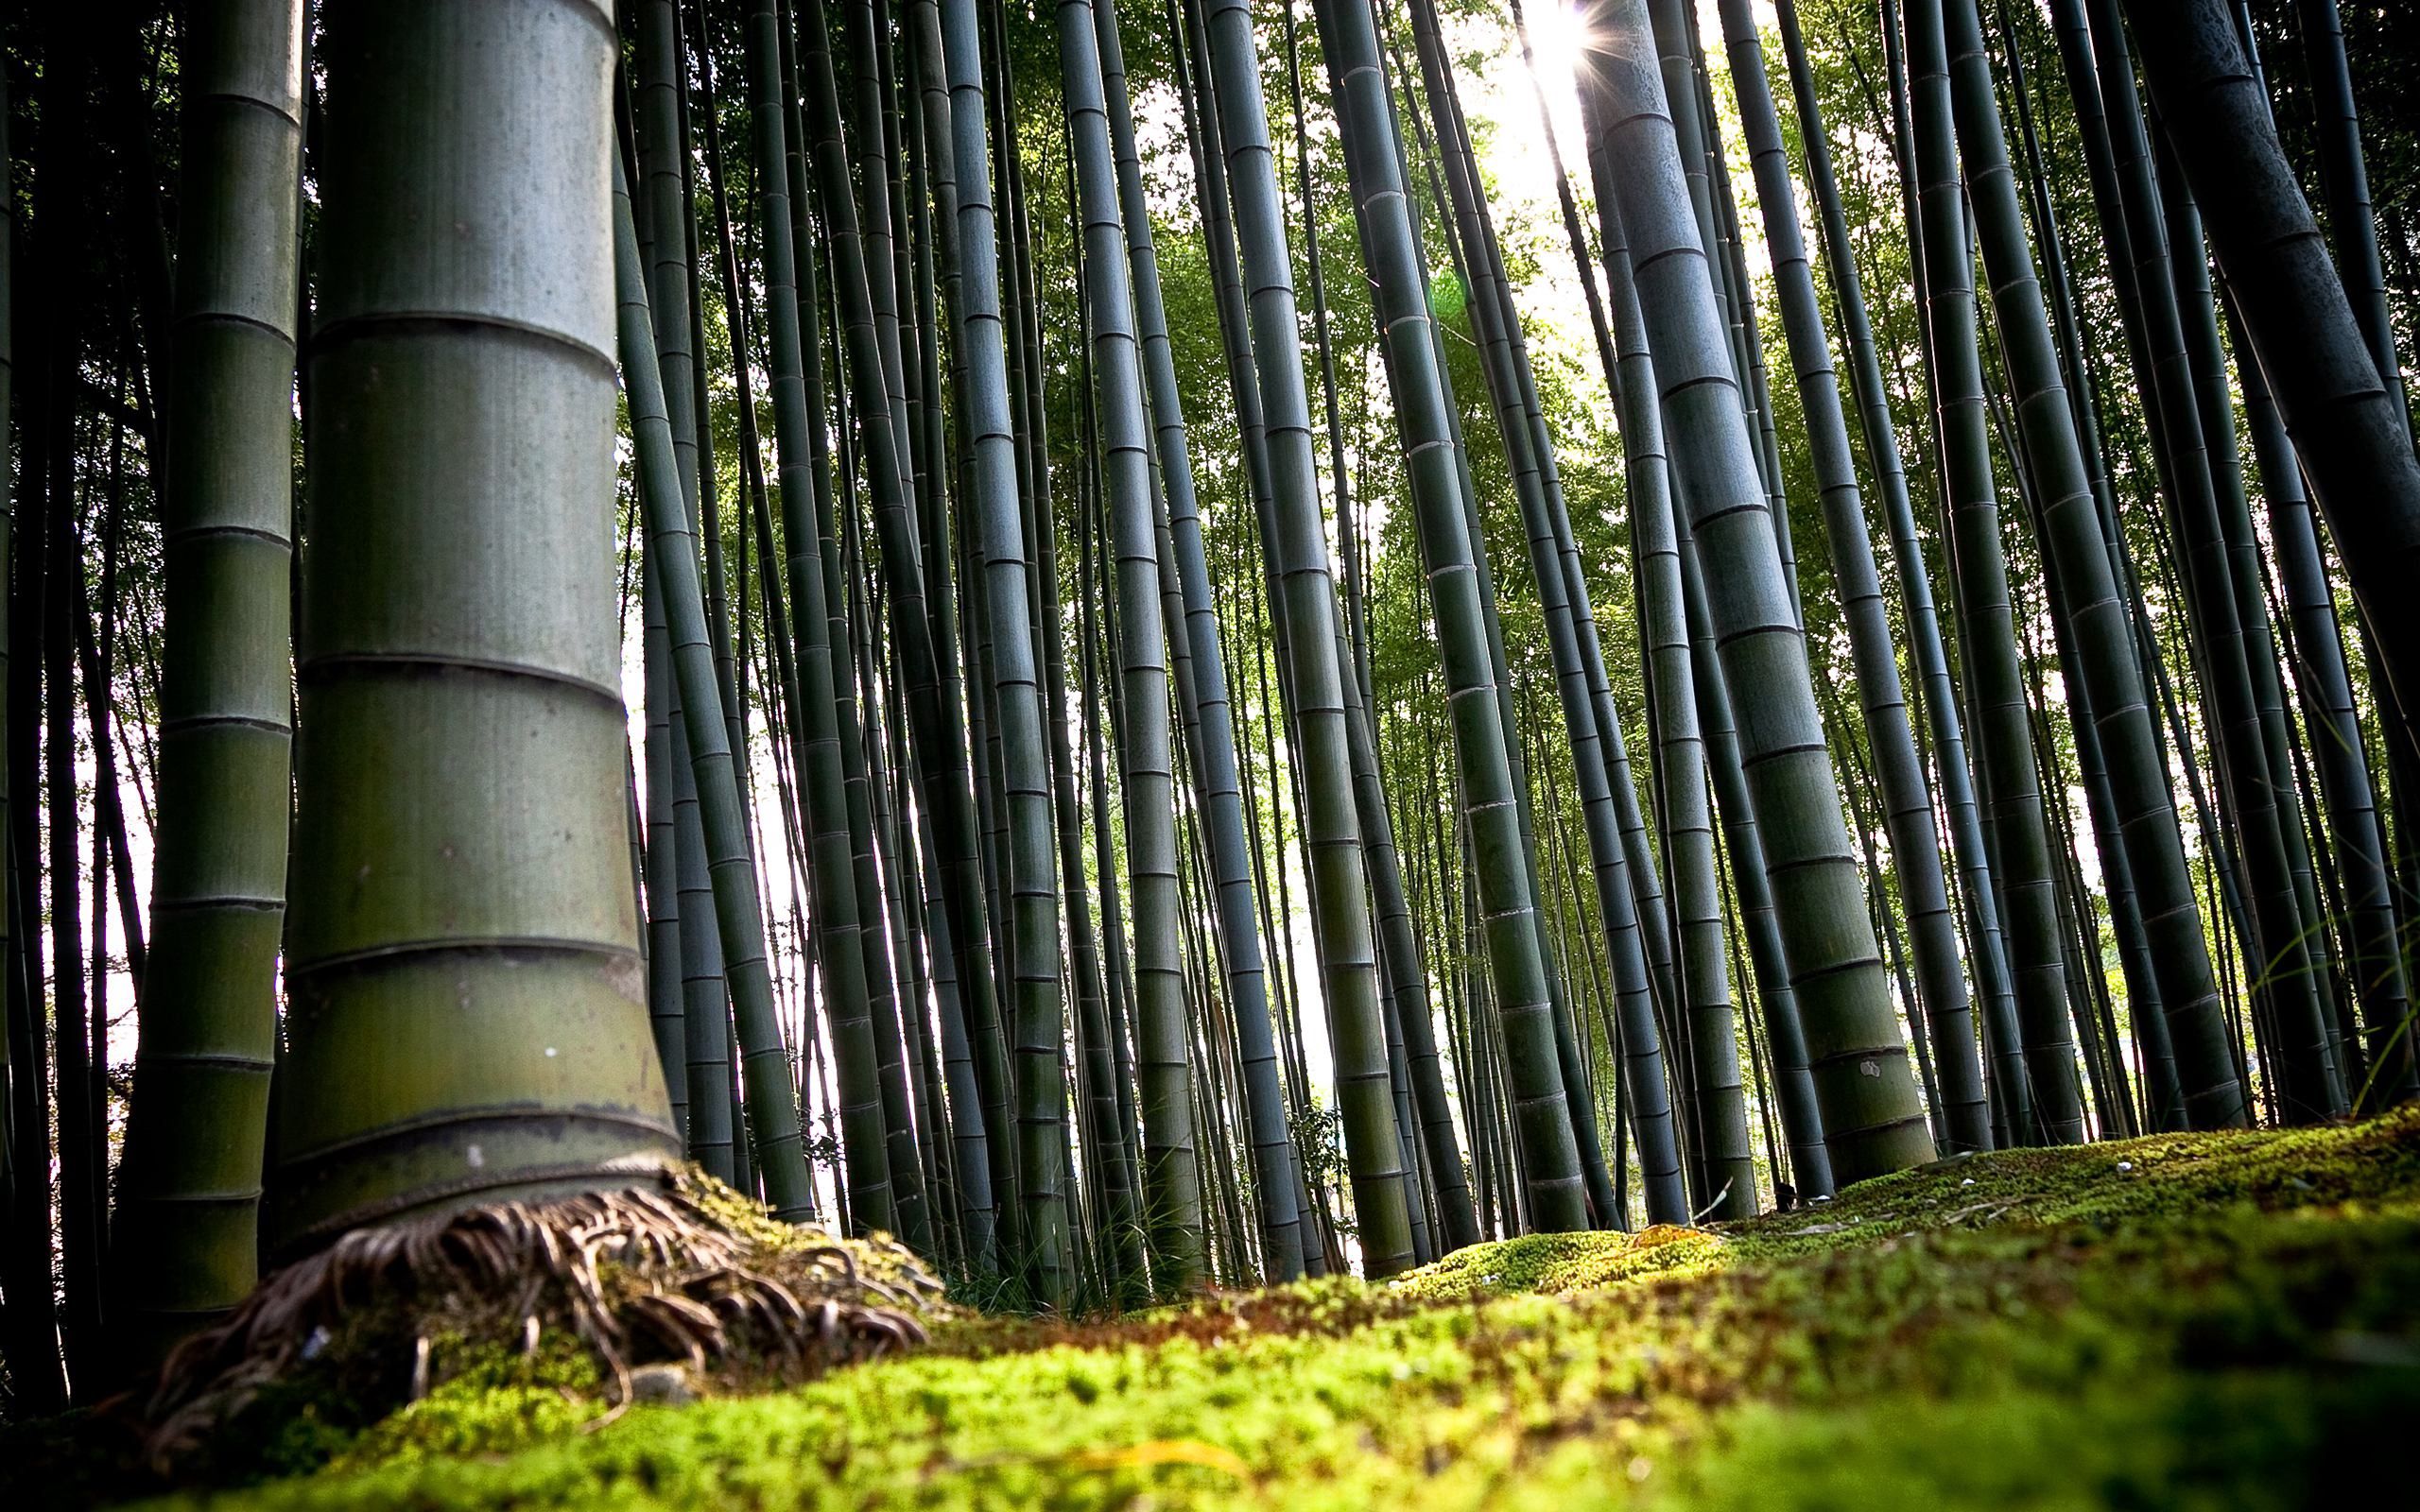 land, nature, green, earth, bamboo, roots, stems